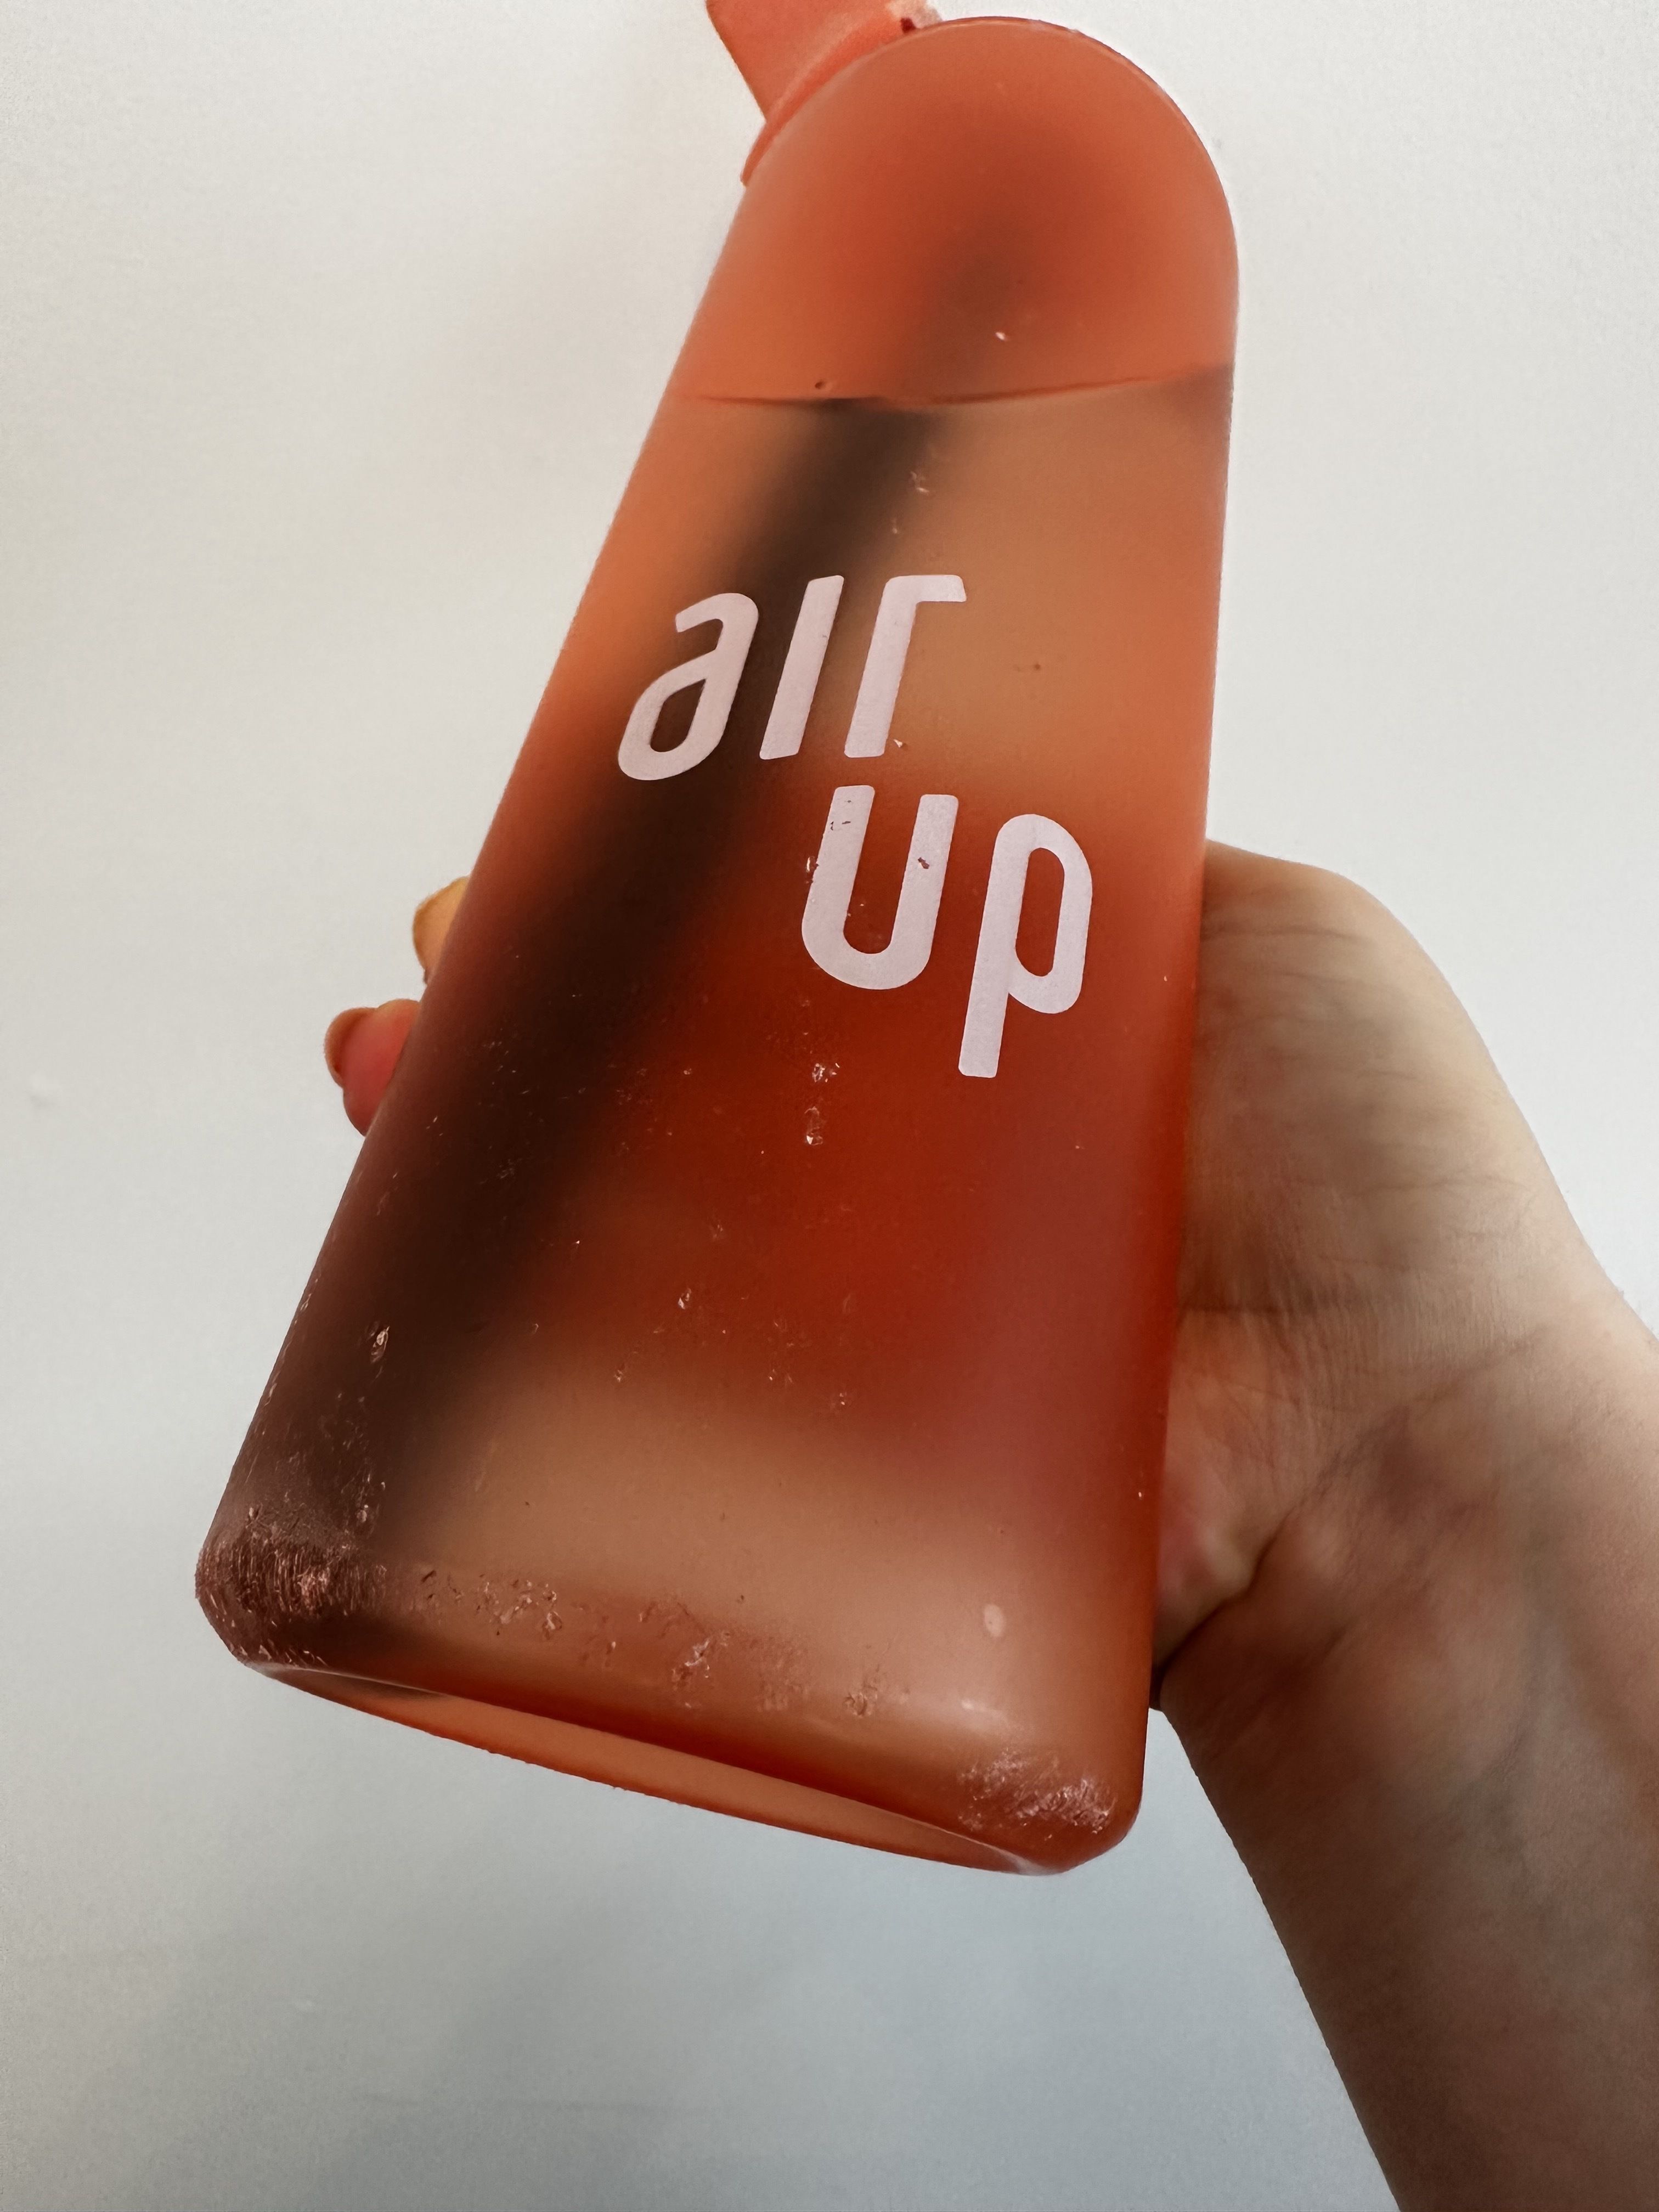 Air Up Review: Honest Look at the “Brain Tricking” Water Bottle